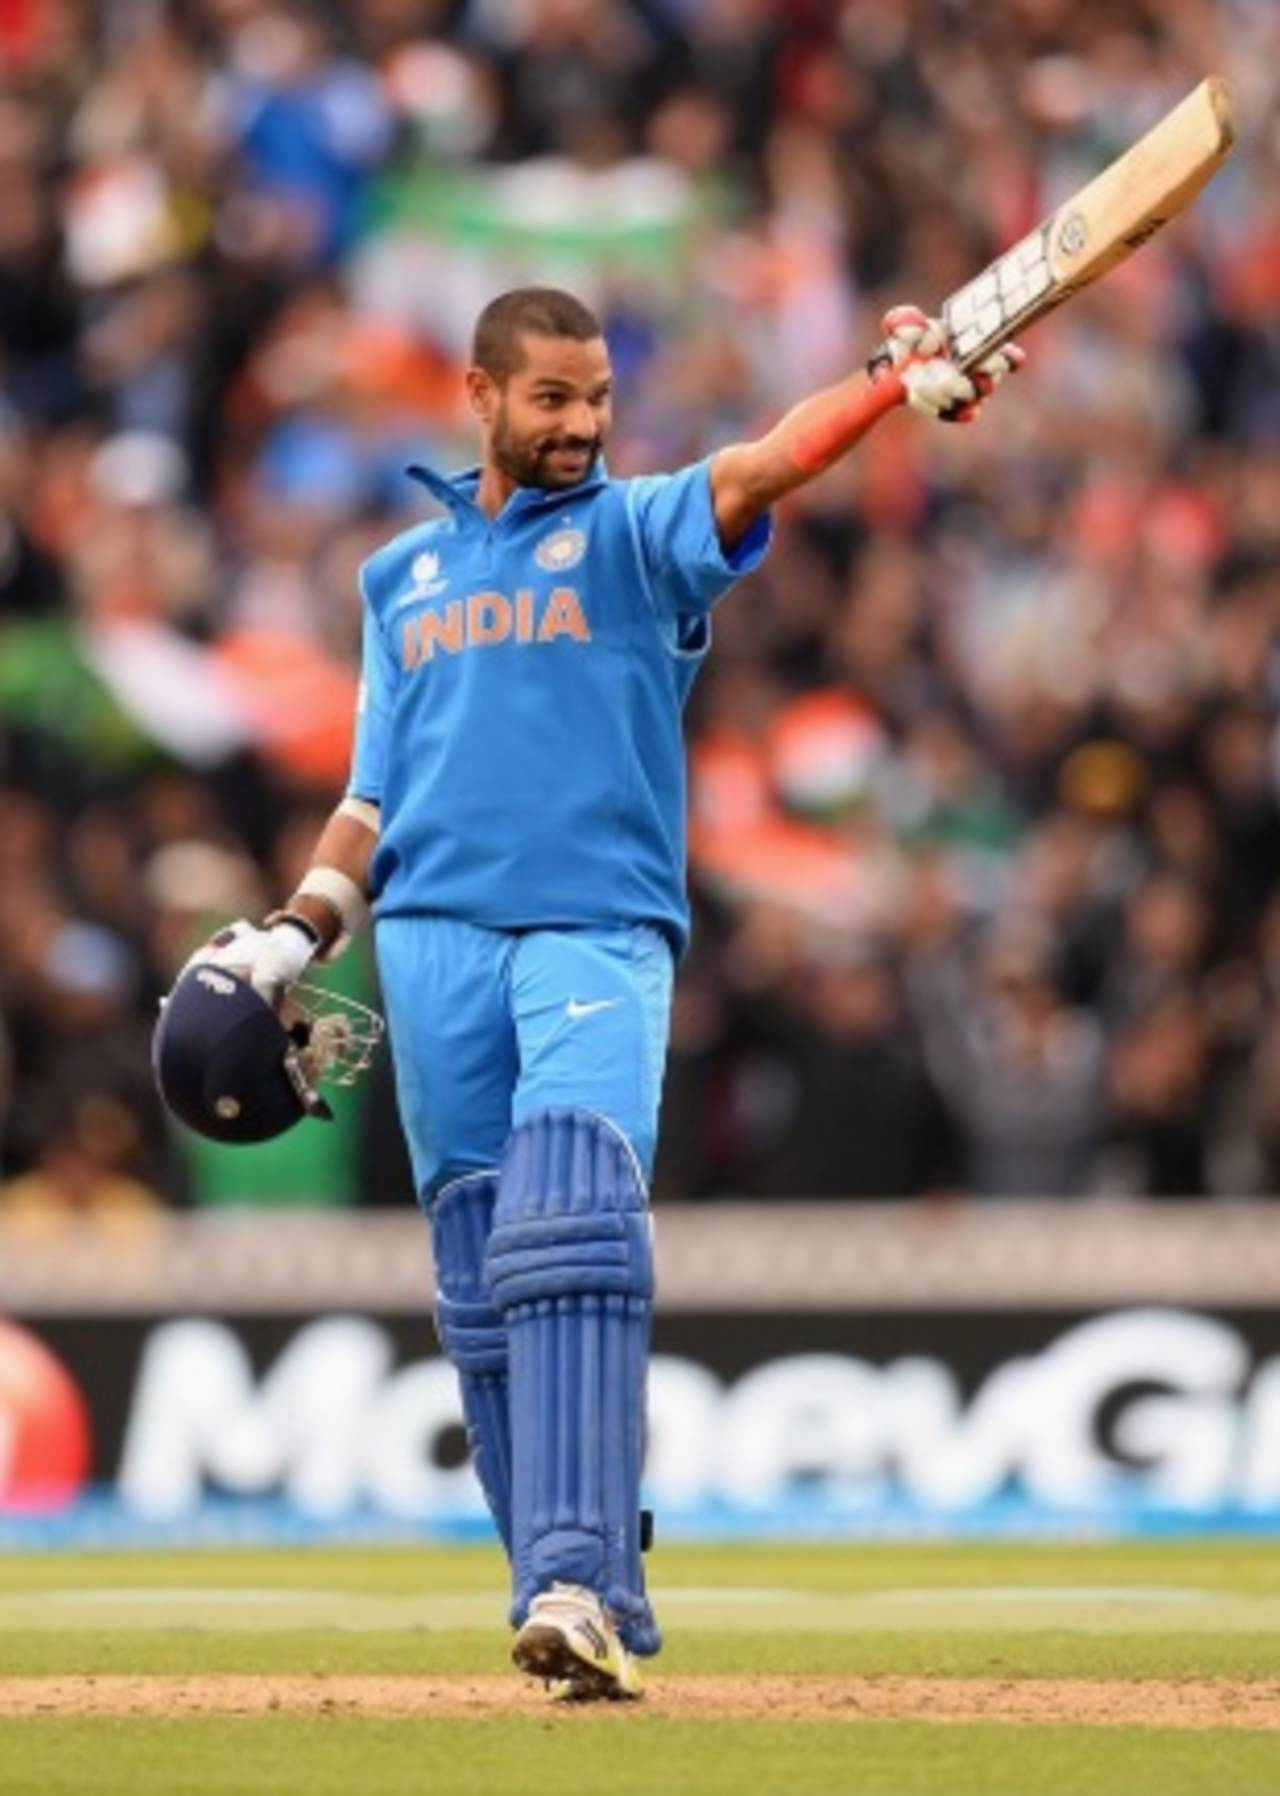 Shikhar Dhawan's batting was a key component of India winning the Champions Trophy&nbsp;&nbsp;&bull;&nbsp;&nbsp;Getty Images